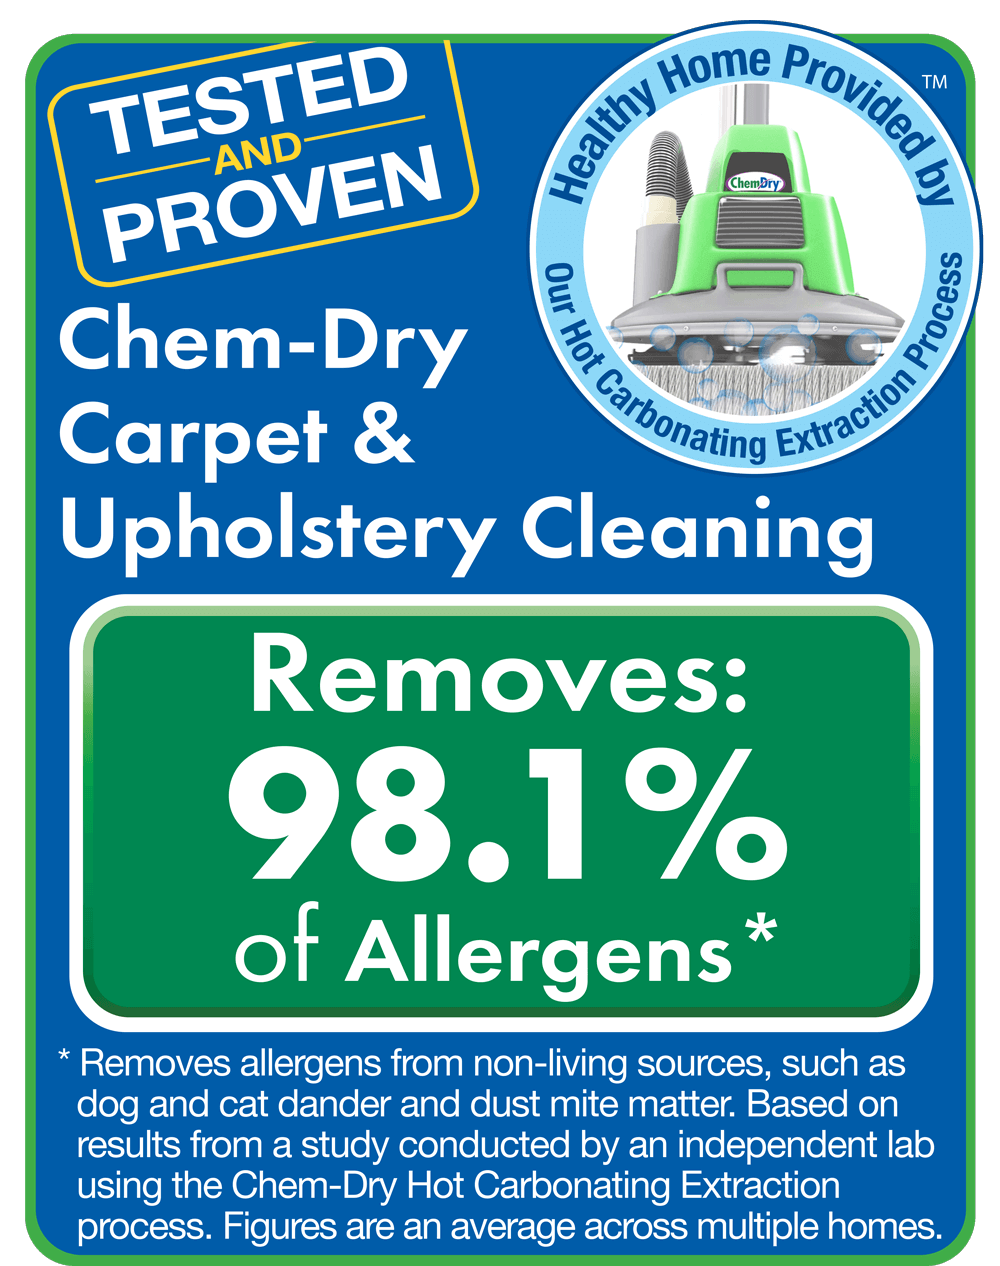 tested and proven. chem-dry carpet & upholstery cleaning removes 98.1% of allergens. Removes allergens from non-living sources, such as dog and cat dander and dust mite matter. Based on results from a study conducted by an independent lab using the Chem-Dry Hot Carbonating Extraction process. Figures are an average across multiple homes.